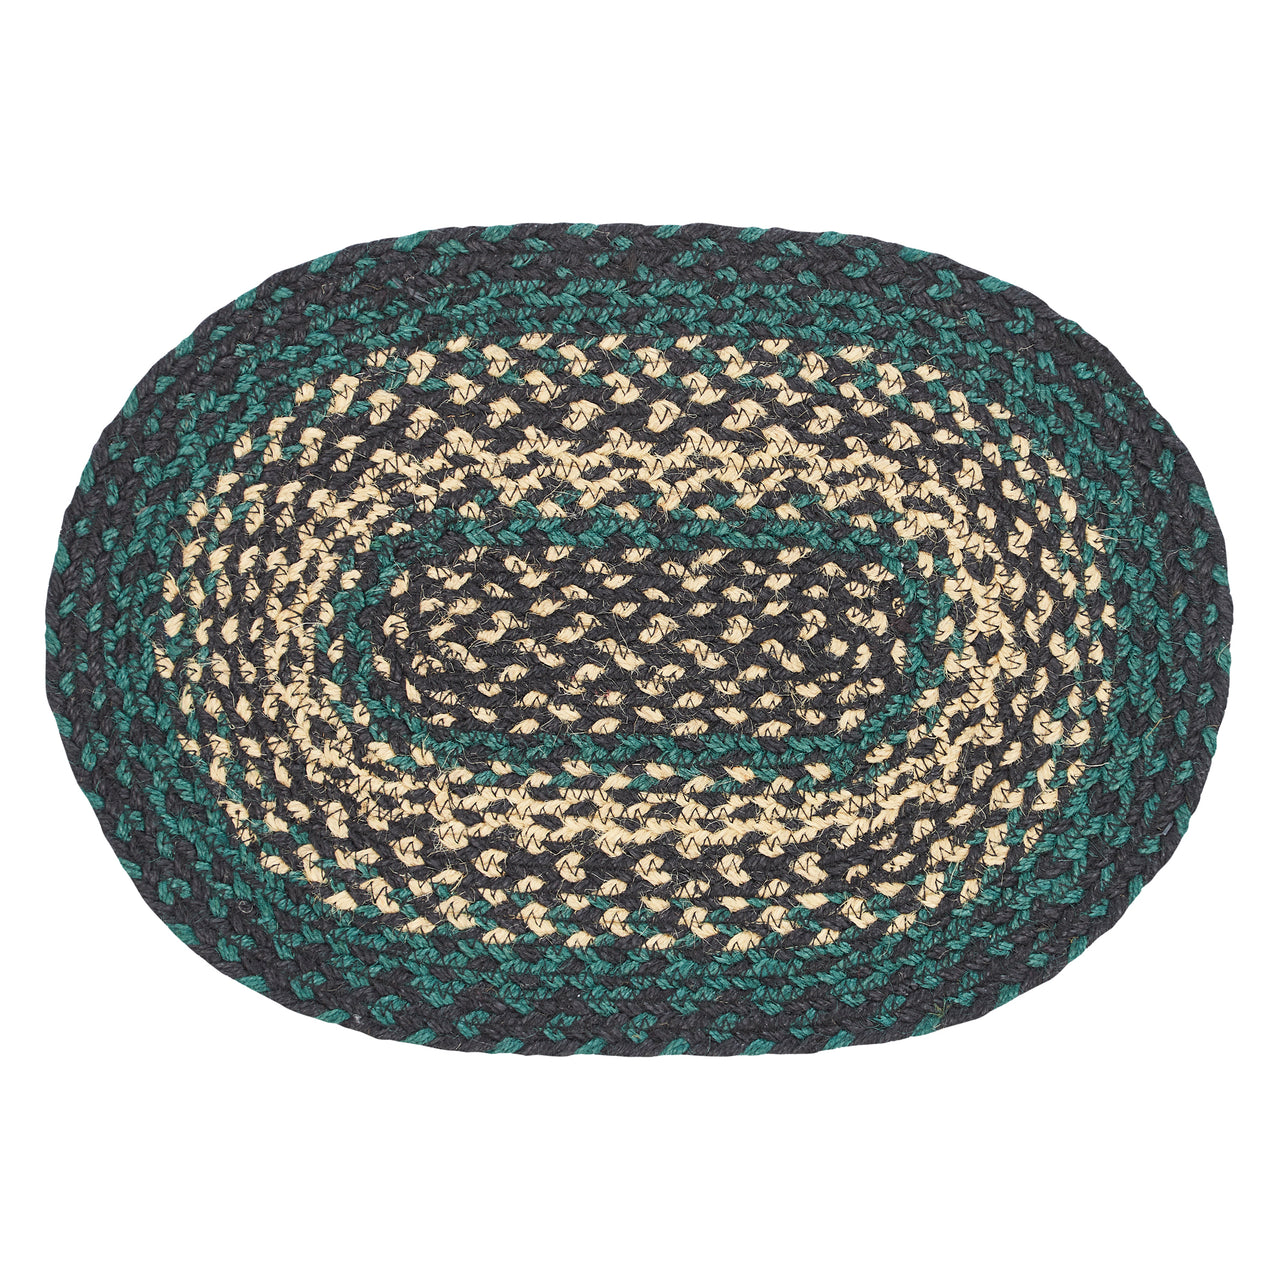 Pine Grove Jute Braided Oval Placemat 10"x15" VHC Brands